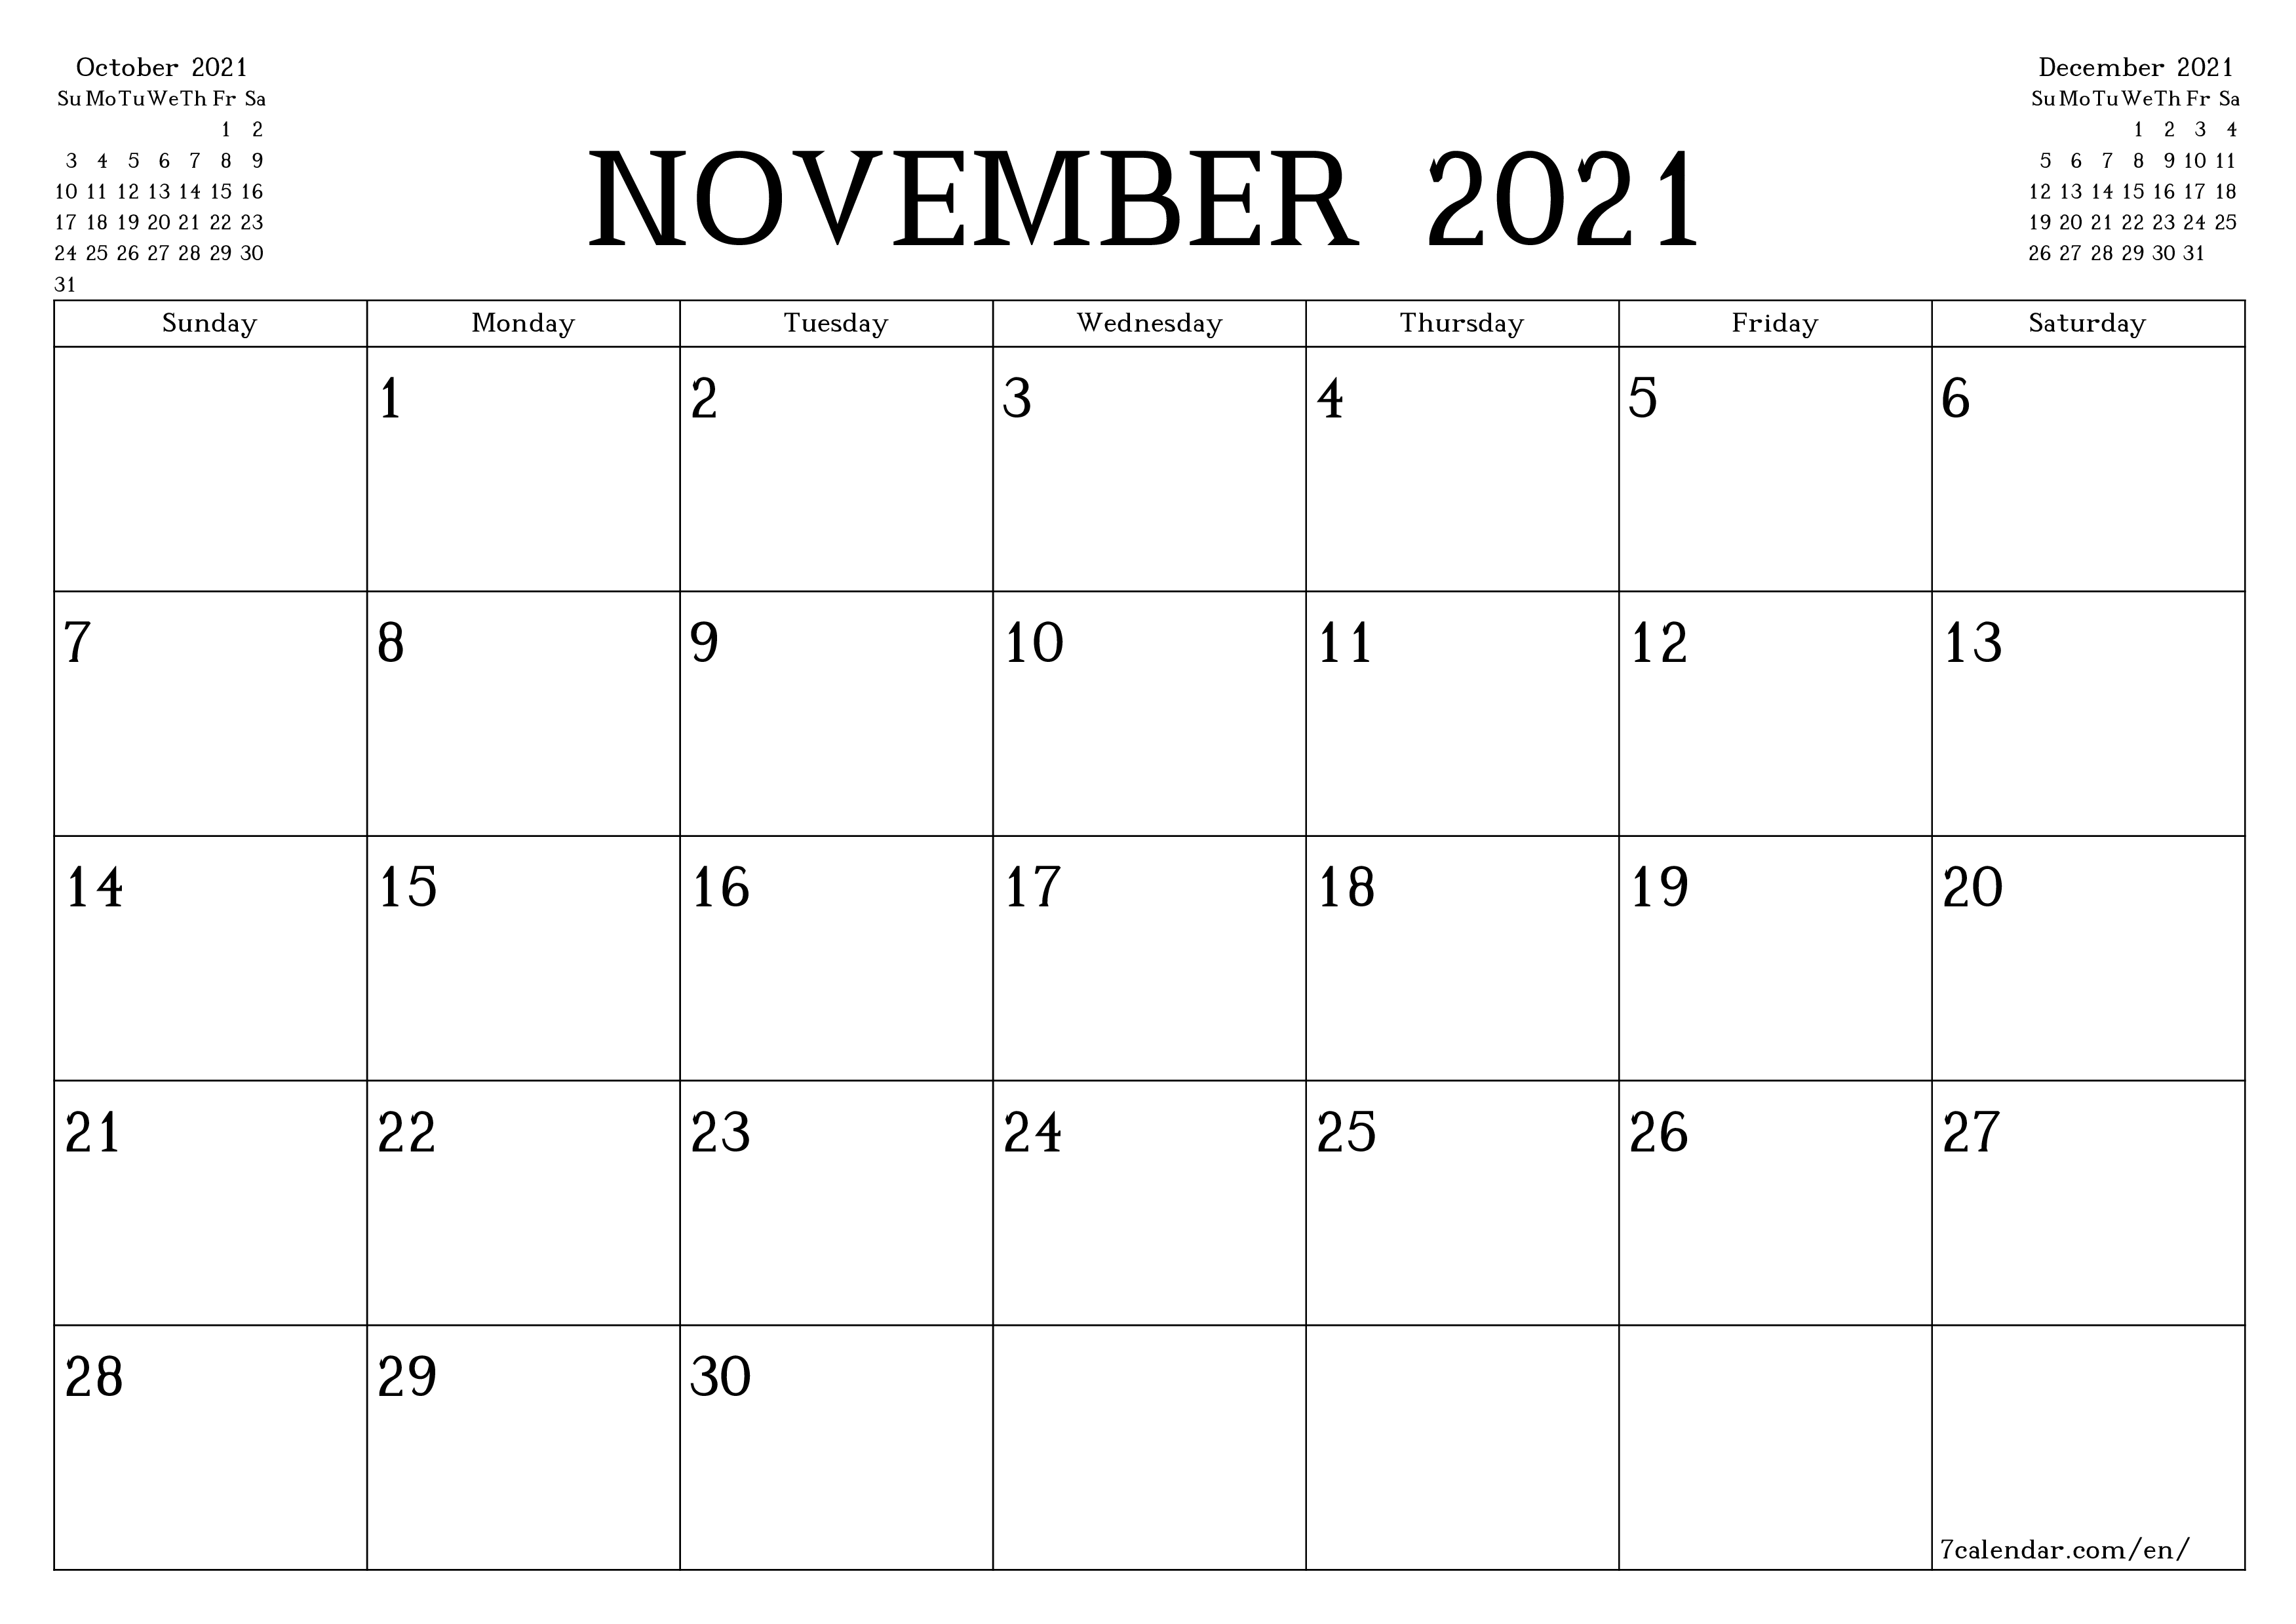 Blank monthly printable calendar and planner for month November 2021 with notes save and print to PDF PNG English - 7calendar.com